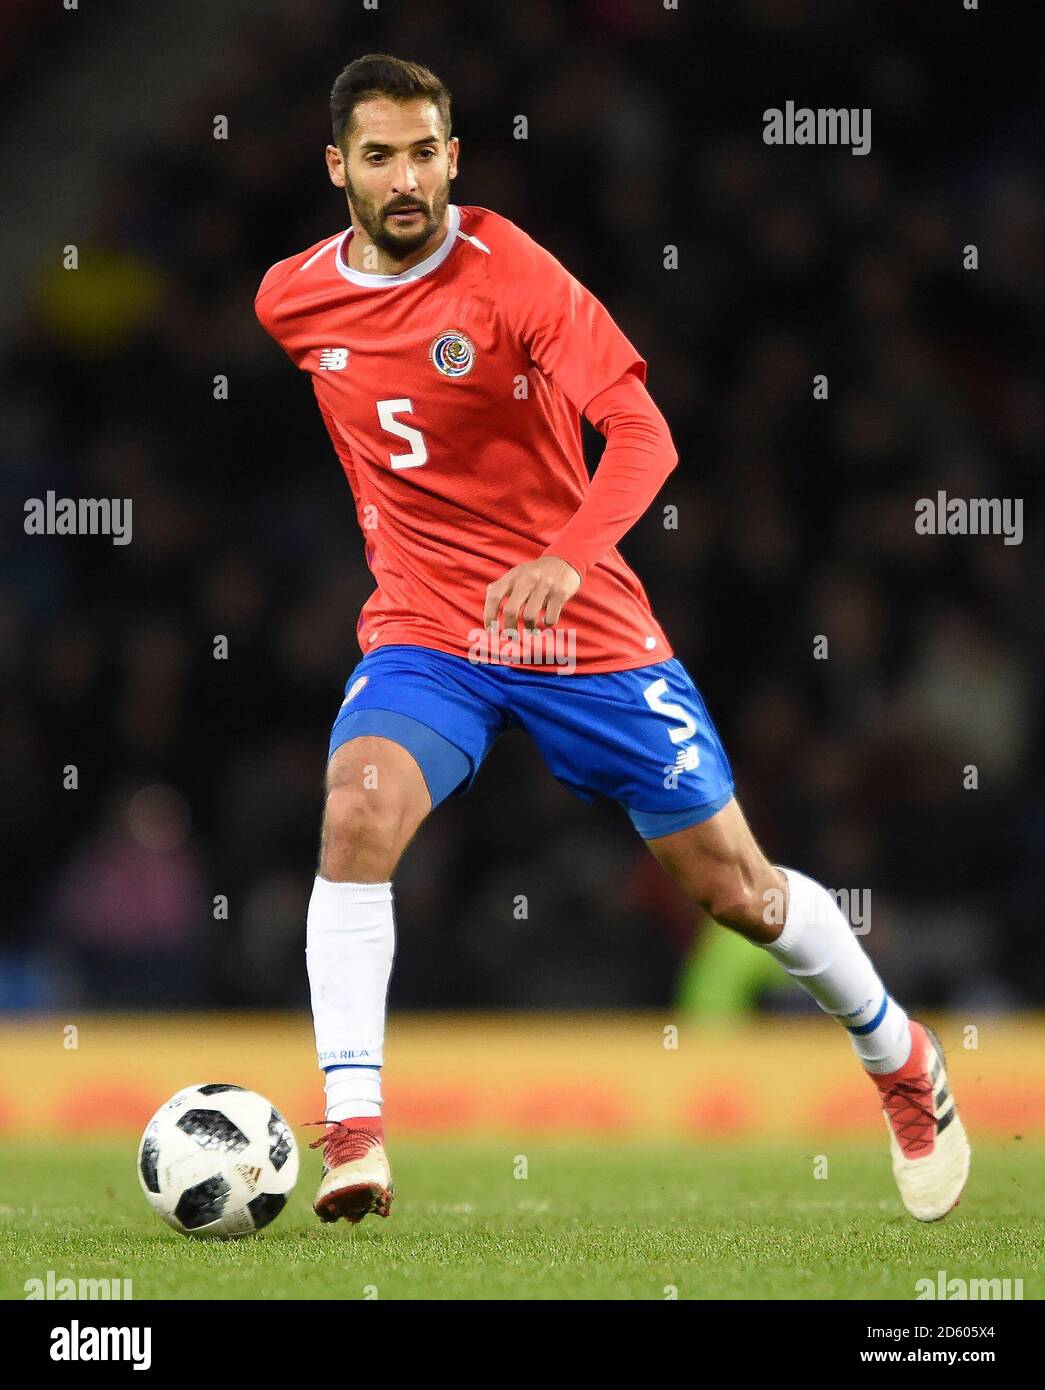 Costa Rica's Celso Borges in action during the international friendly match at Hampden Park, Glasgow Stock Photo